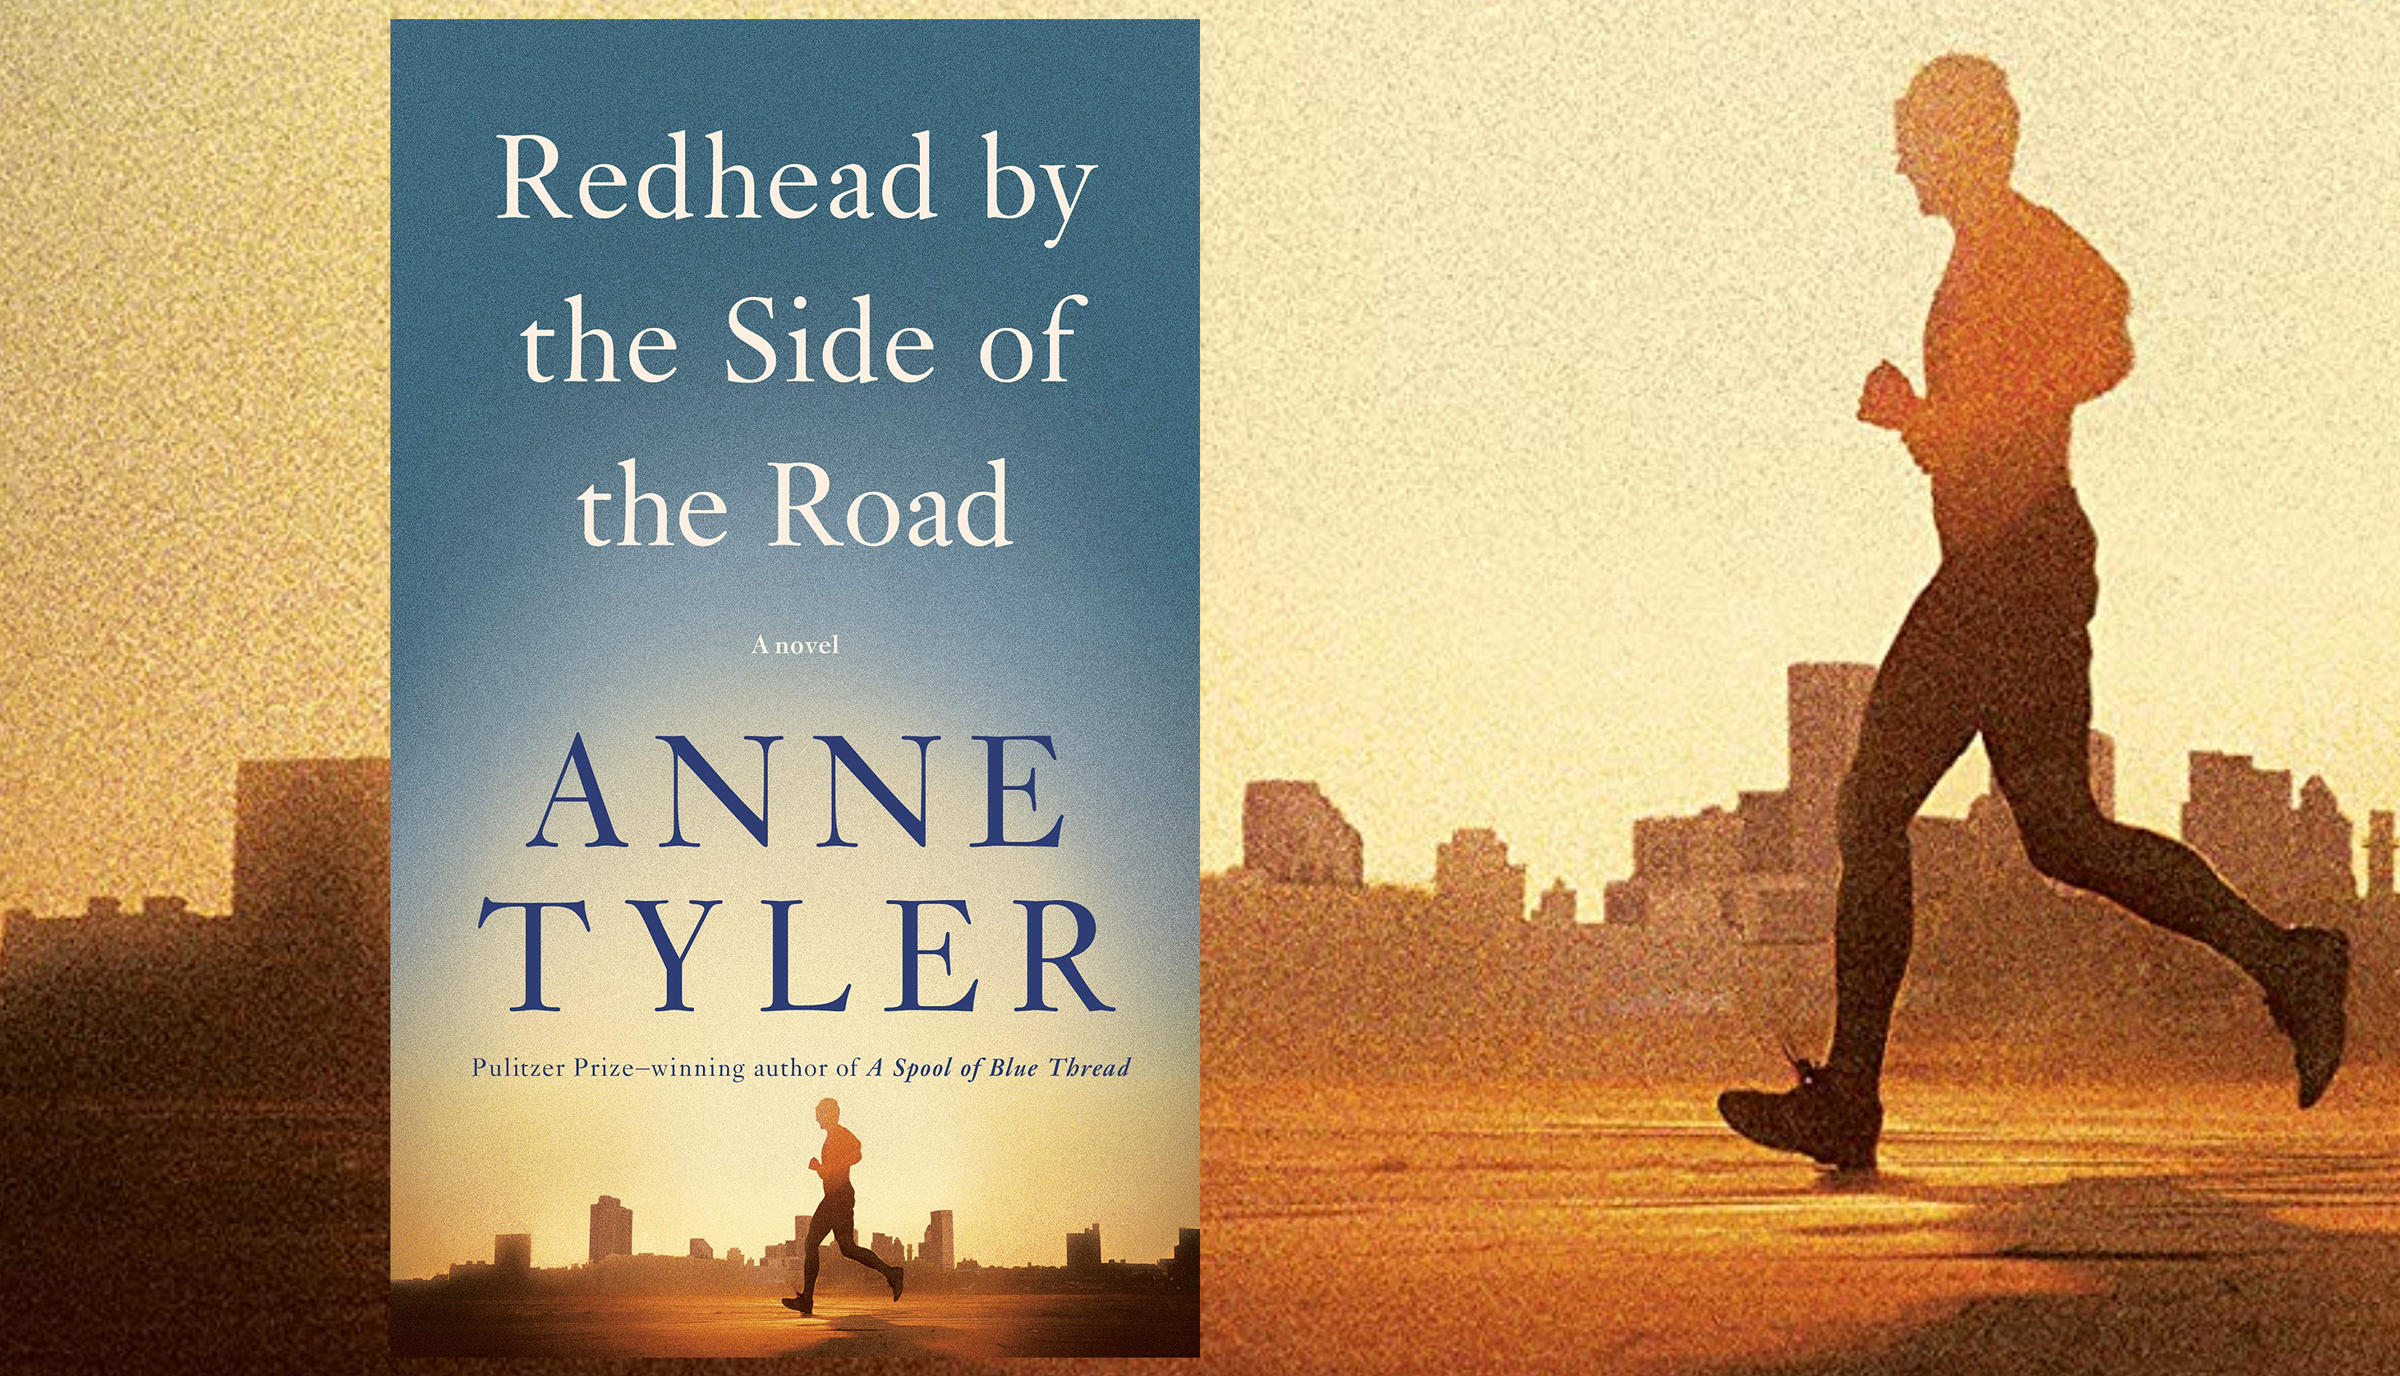 #1749: Anne Tyler’s “Redhead by the Side of the Road” | The Book Show